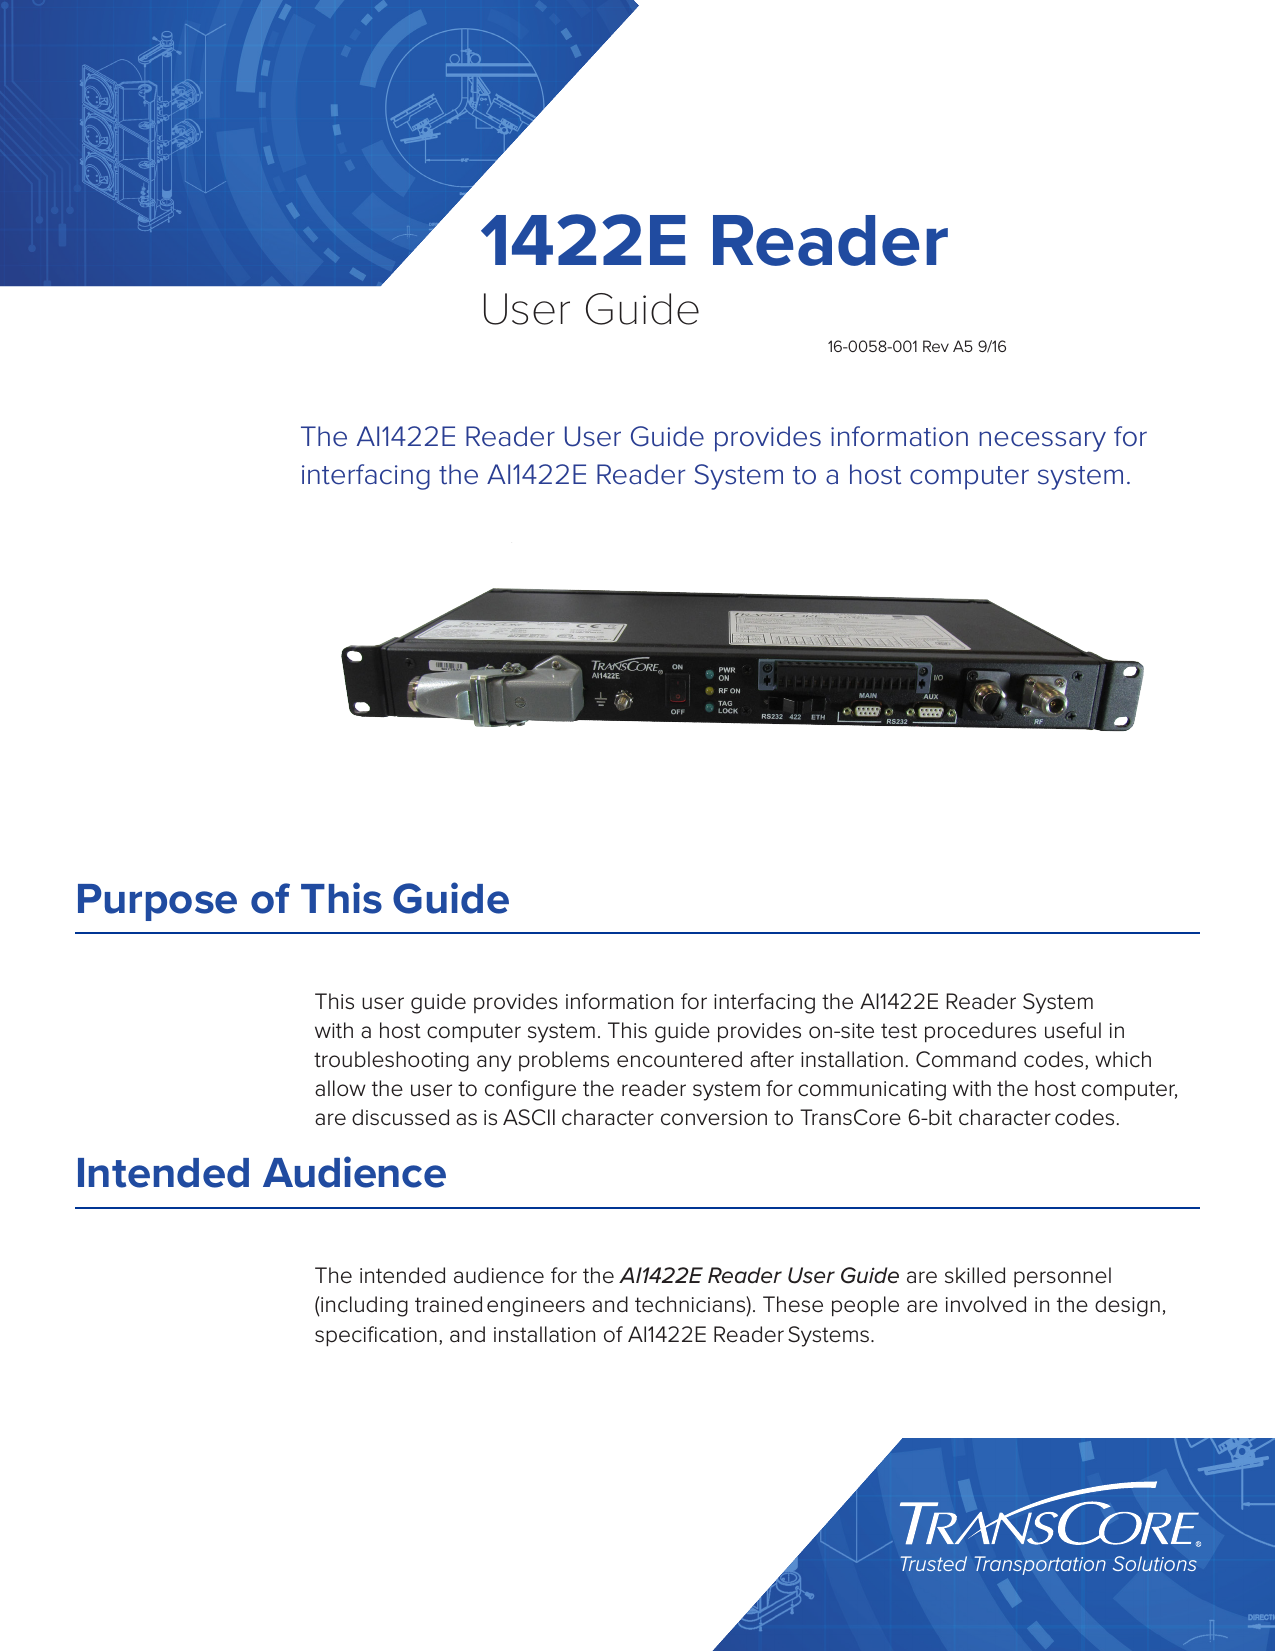 1422E ReaderUser GuideTrusted Transportation Solutions16-0058-001 Rev A5 9/16The AI1422E Reader User Guide provides information necessary for interfacing the AI1422E Reader System to a host computer system.Purpose of This GuideThis user guide provides information for interfacing the AI1422E Reader System with a host computer system. This guide provides on-site test procedures useful in troubleshooting any problems encountered after installation. Command codes, which allow the user to conﬁgure the reader system for communicating with the host computer, are discussed as is ASCII character conversion to TransCore 6-bit character codes.Intended AudienceThe intended audience for the AI1422E Reader User Guide are skilled personnel (including trained engineers and technicians). These people are involved in the design, speciﬁcation, and installation of AI1422E Reader Systems.